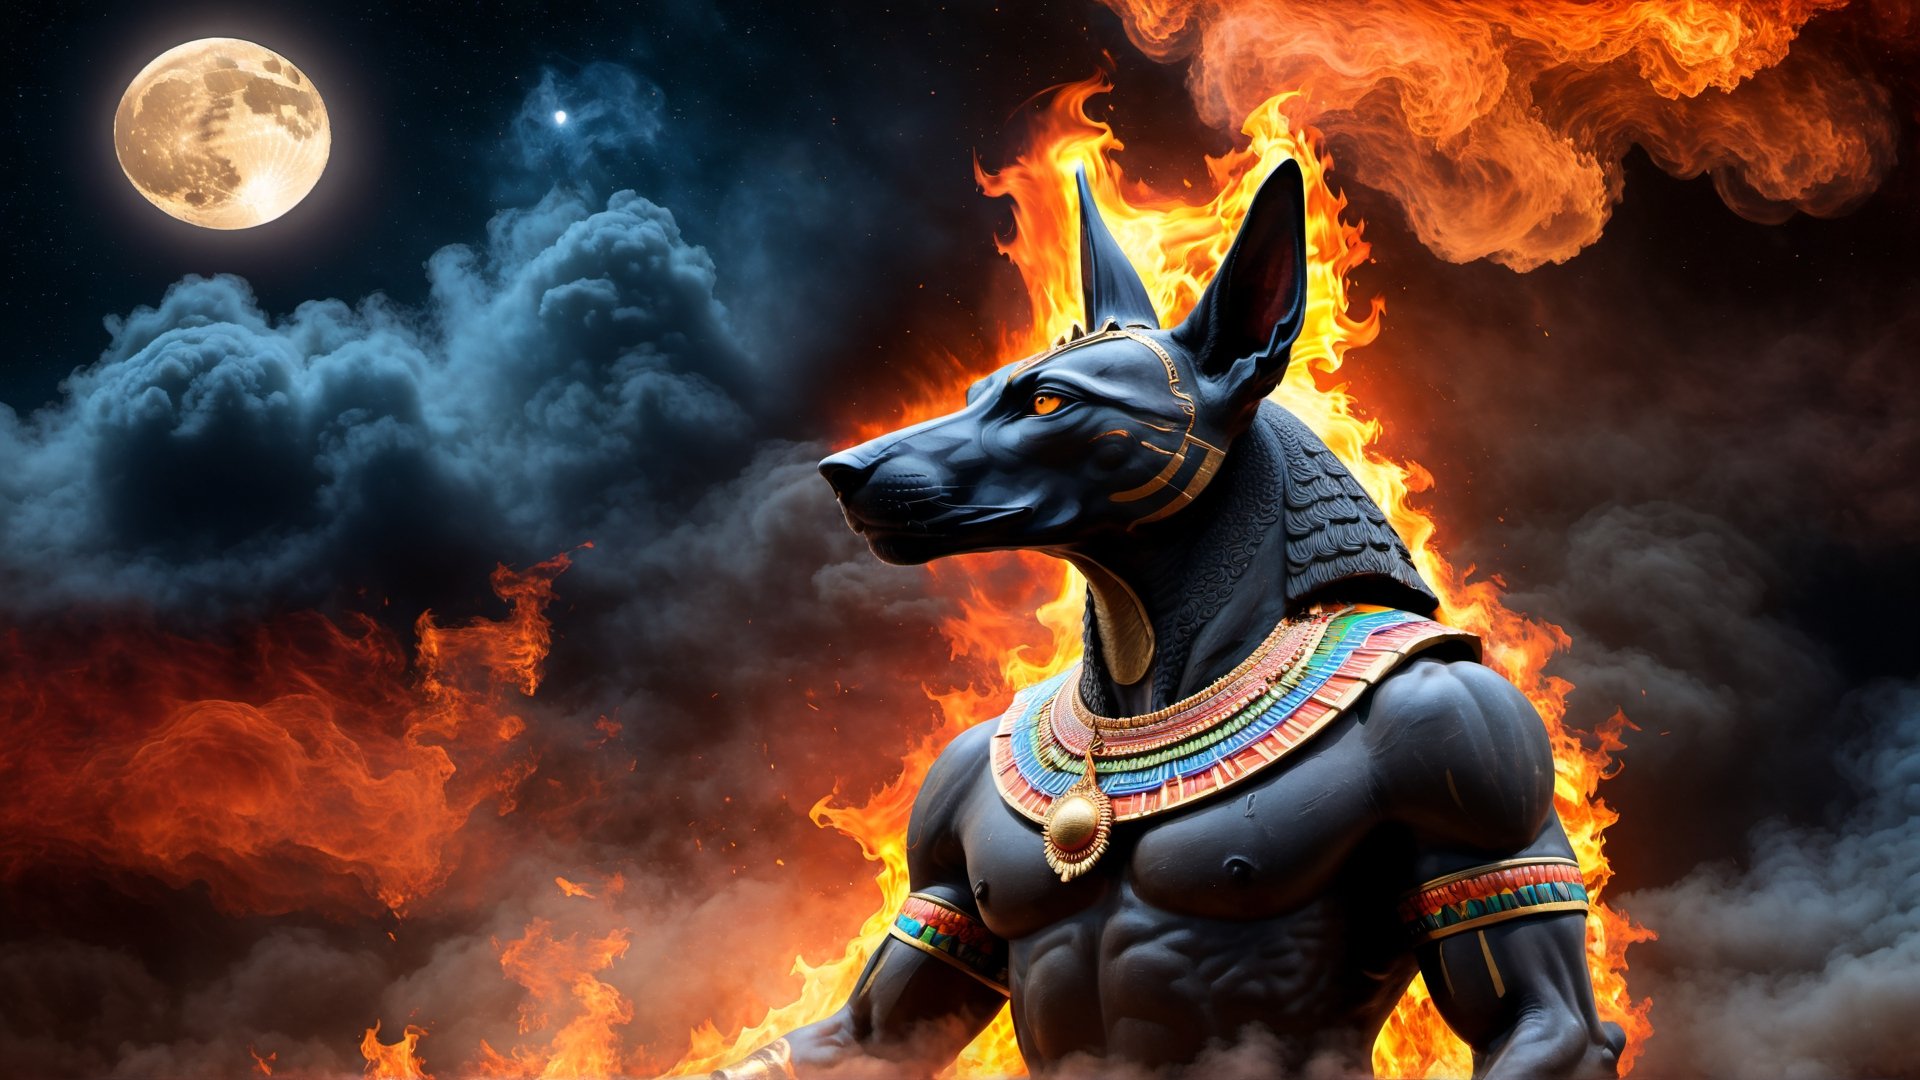 HD image of Anubis multicolored detailed fire and smoke, moon background